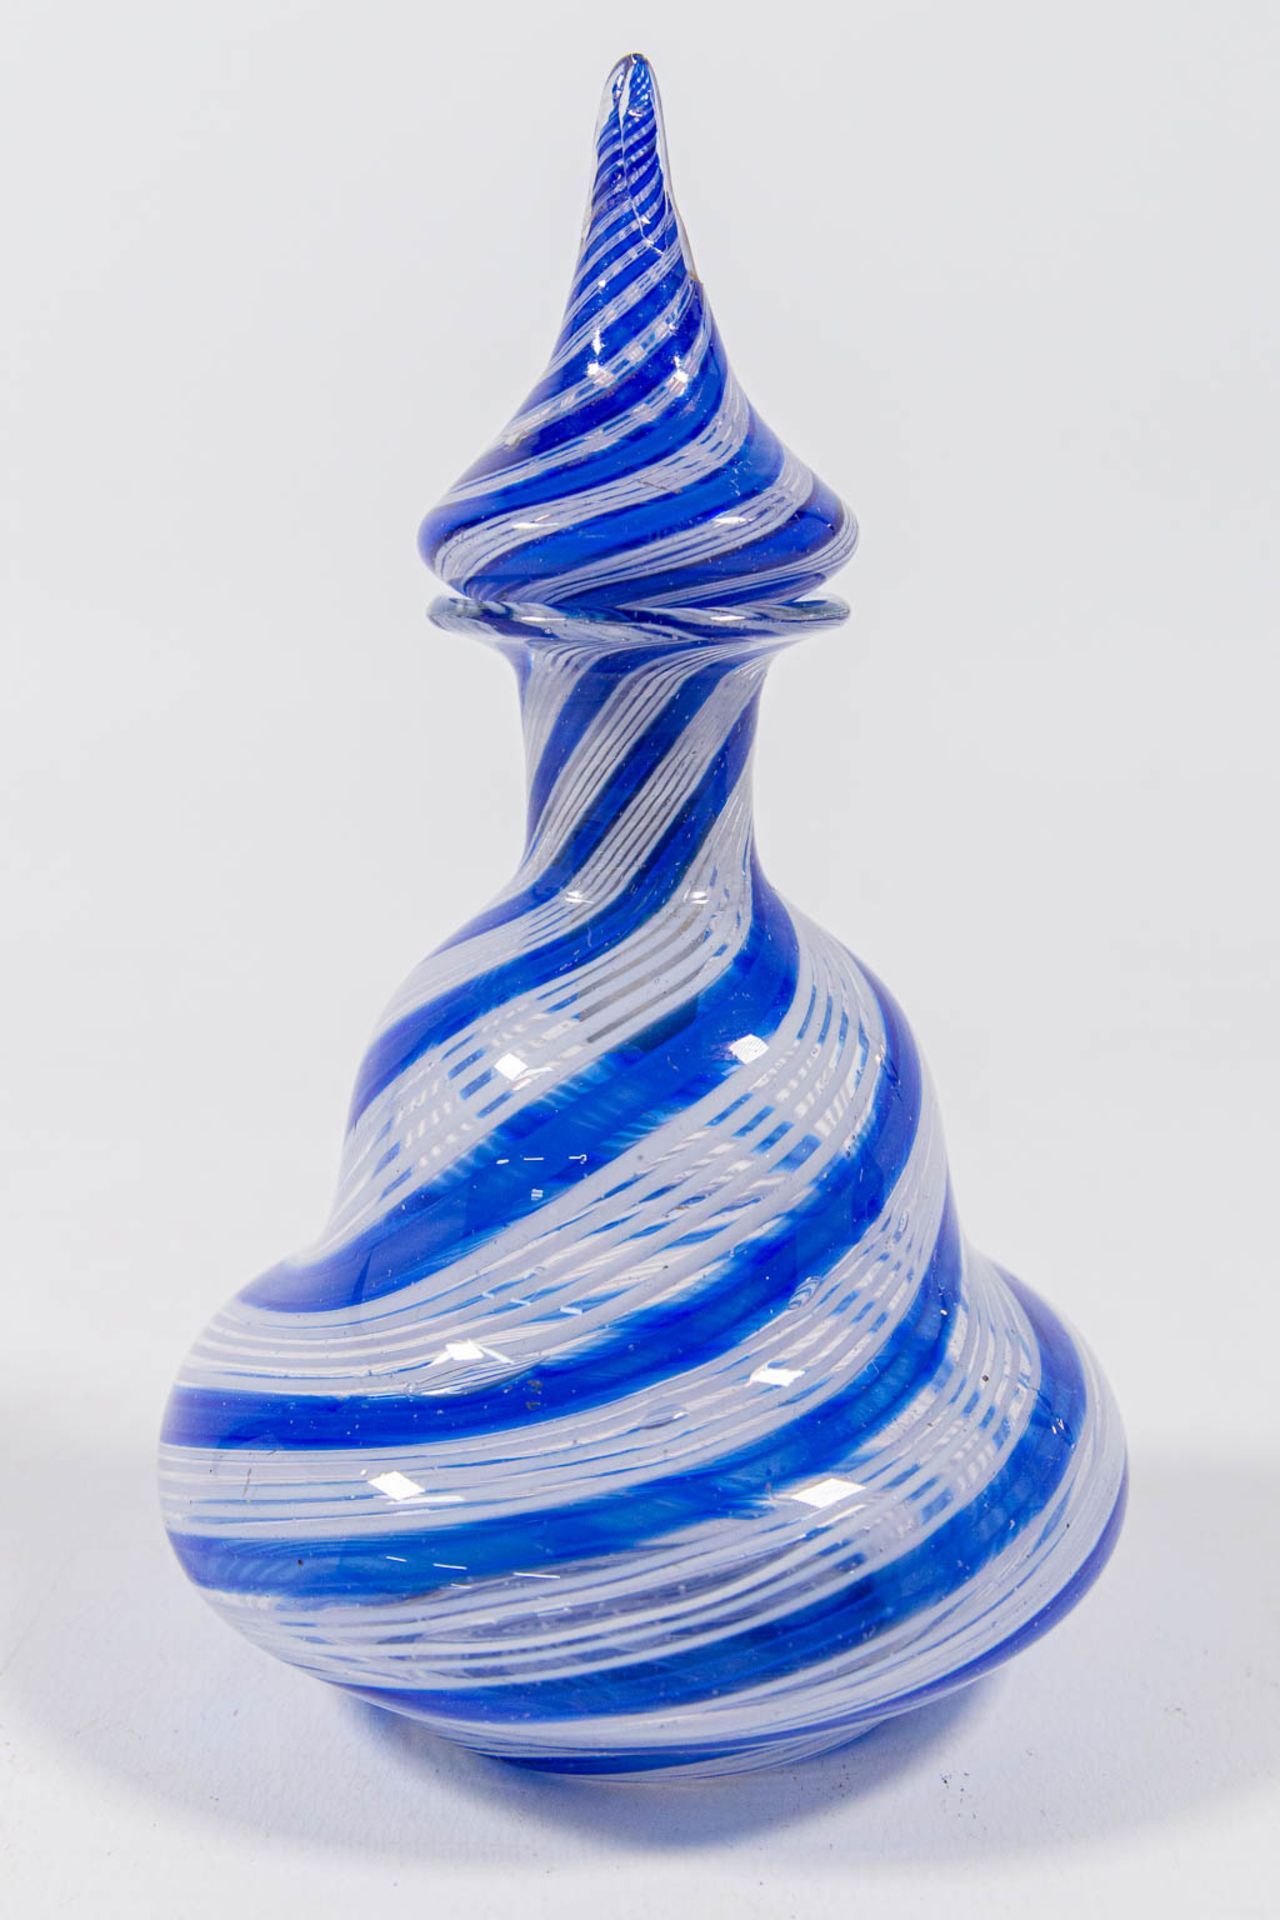 A pair of decanters with stopper, made in Murano, Italy around 1950. (15 x 9 cm) - Image 12 of 17